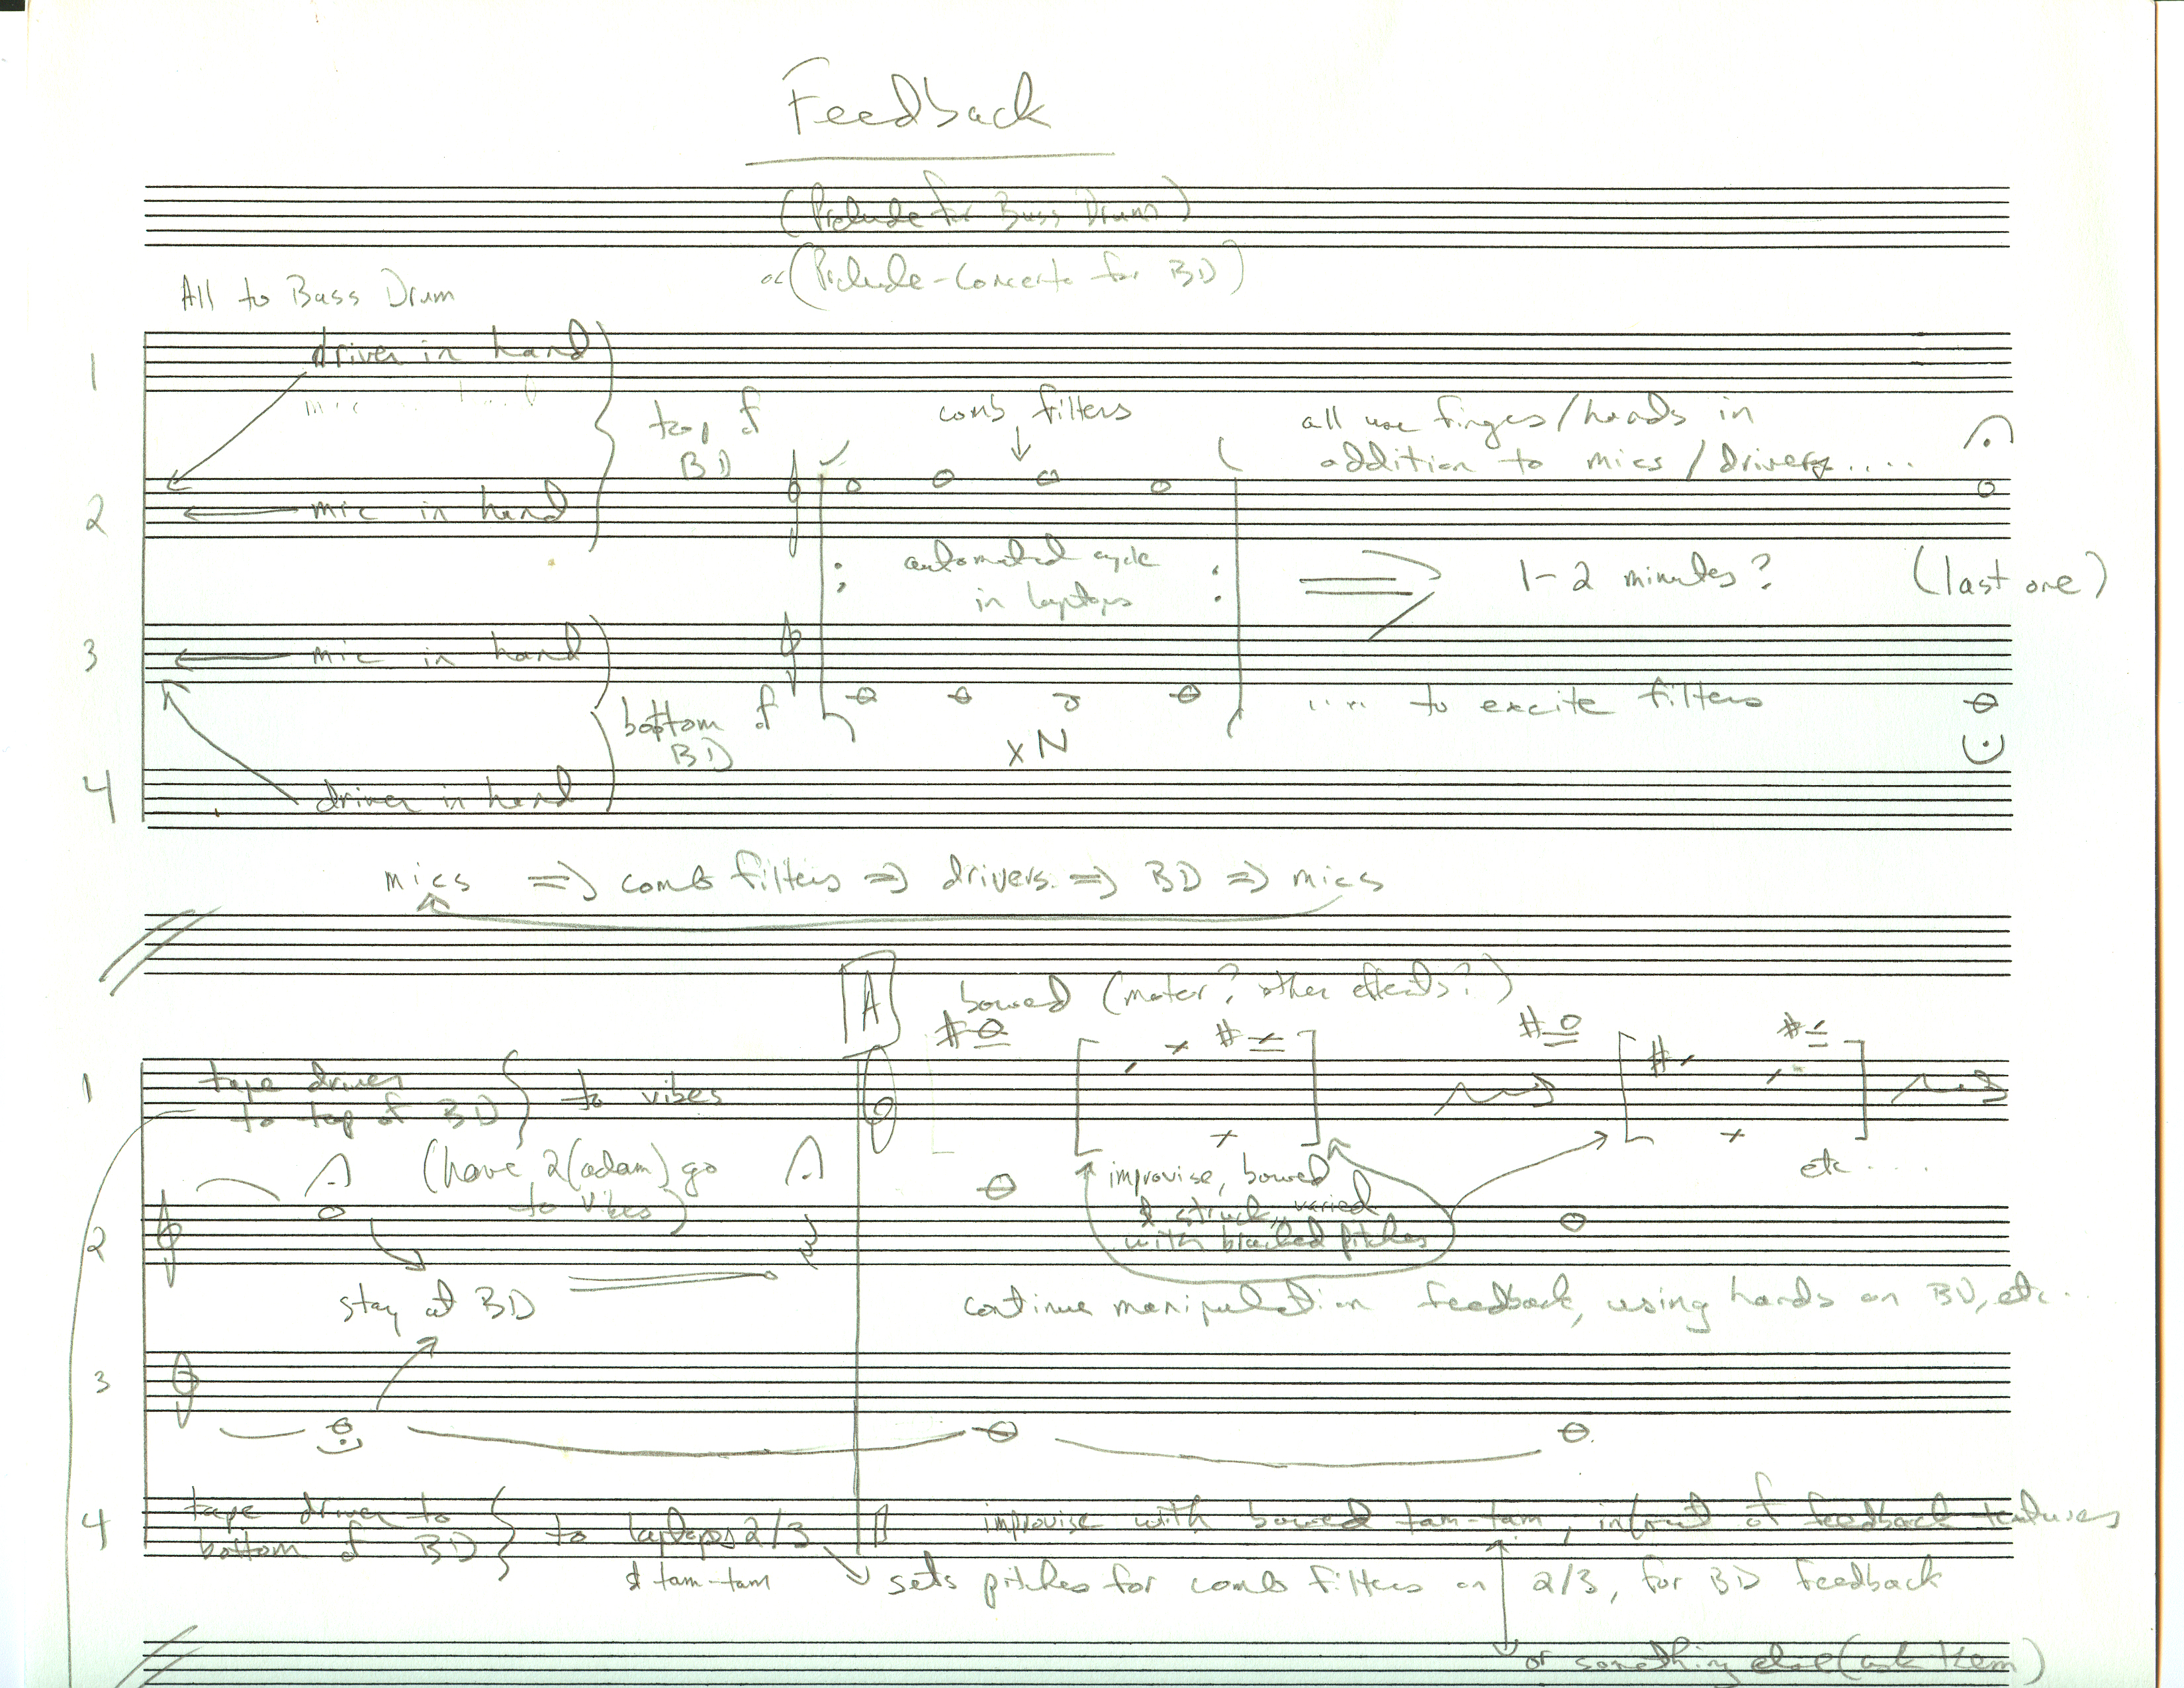 Sample score page: "Feedback" from neither Anvil nor Pulley